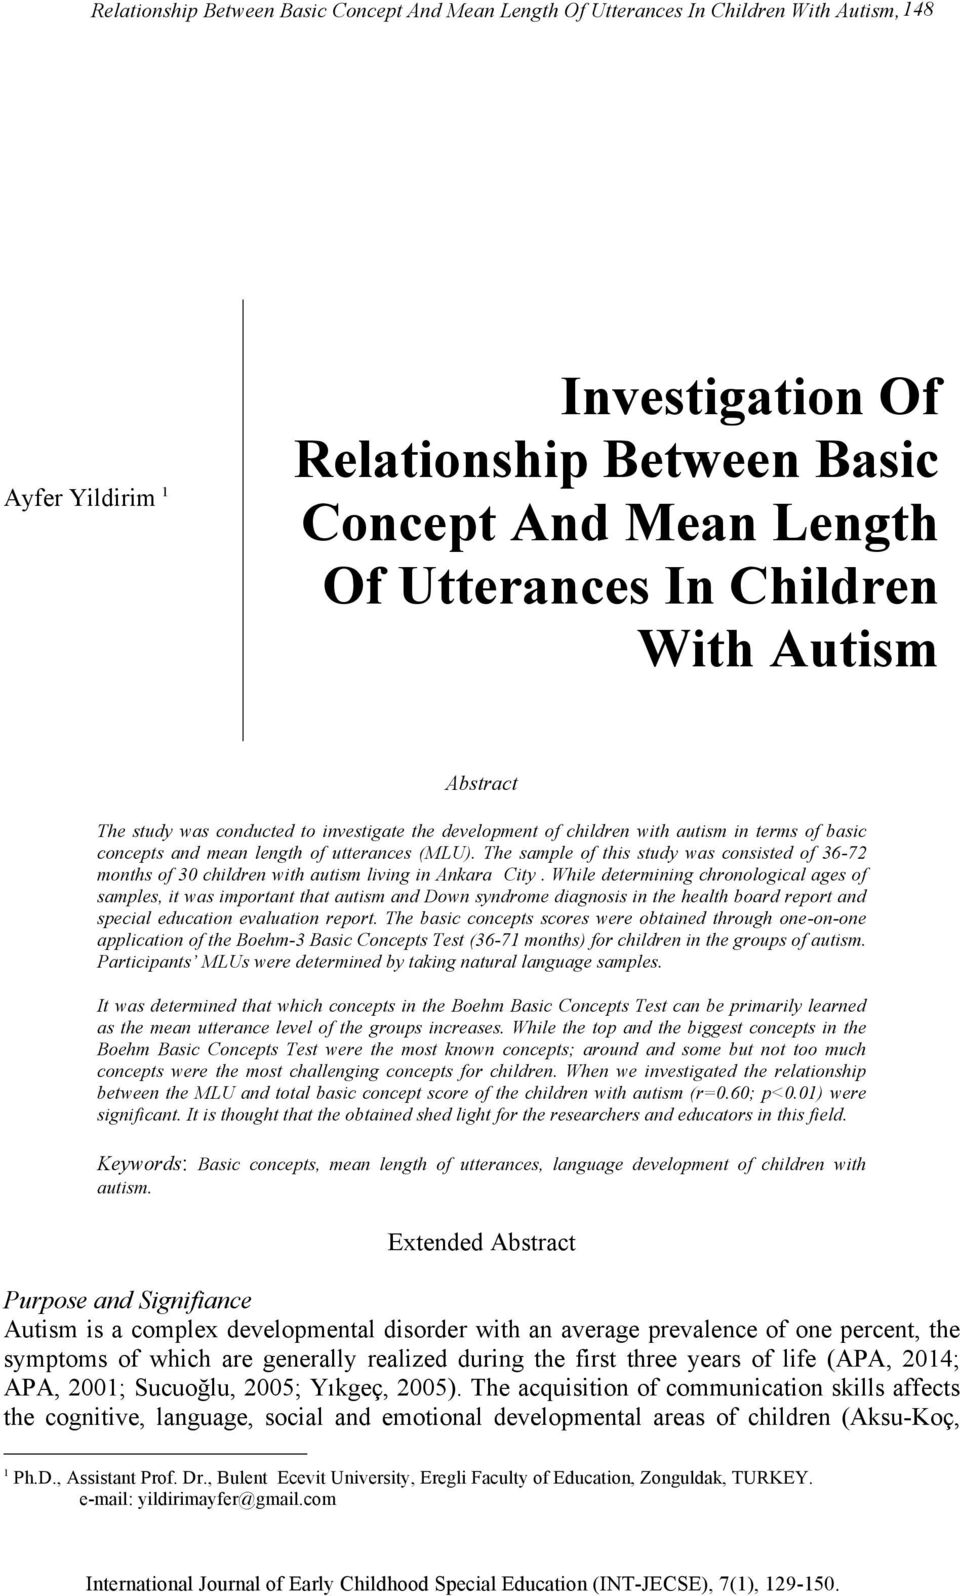 The sample of this study was consisted of 36-72 months of 30 children with autism living in Ankara City.